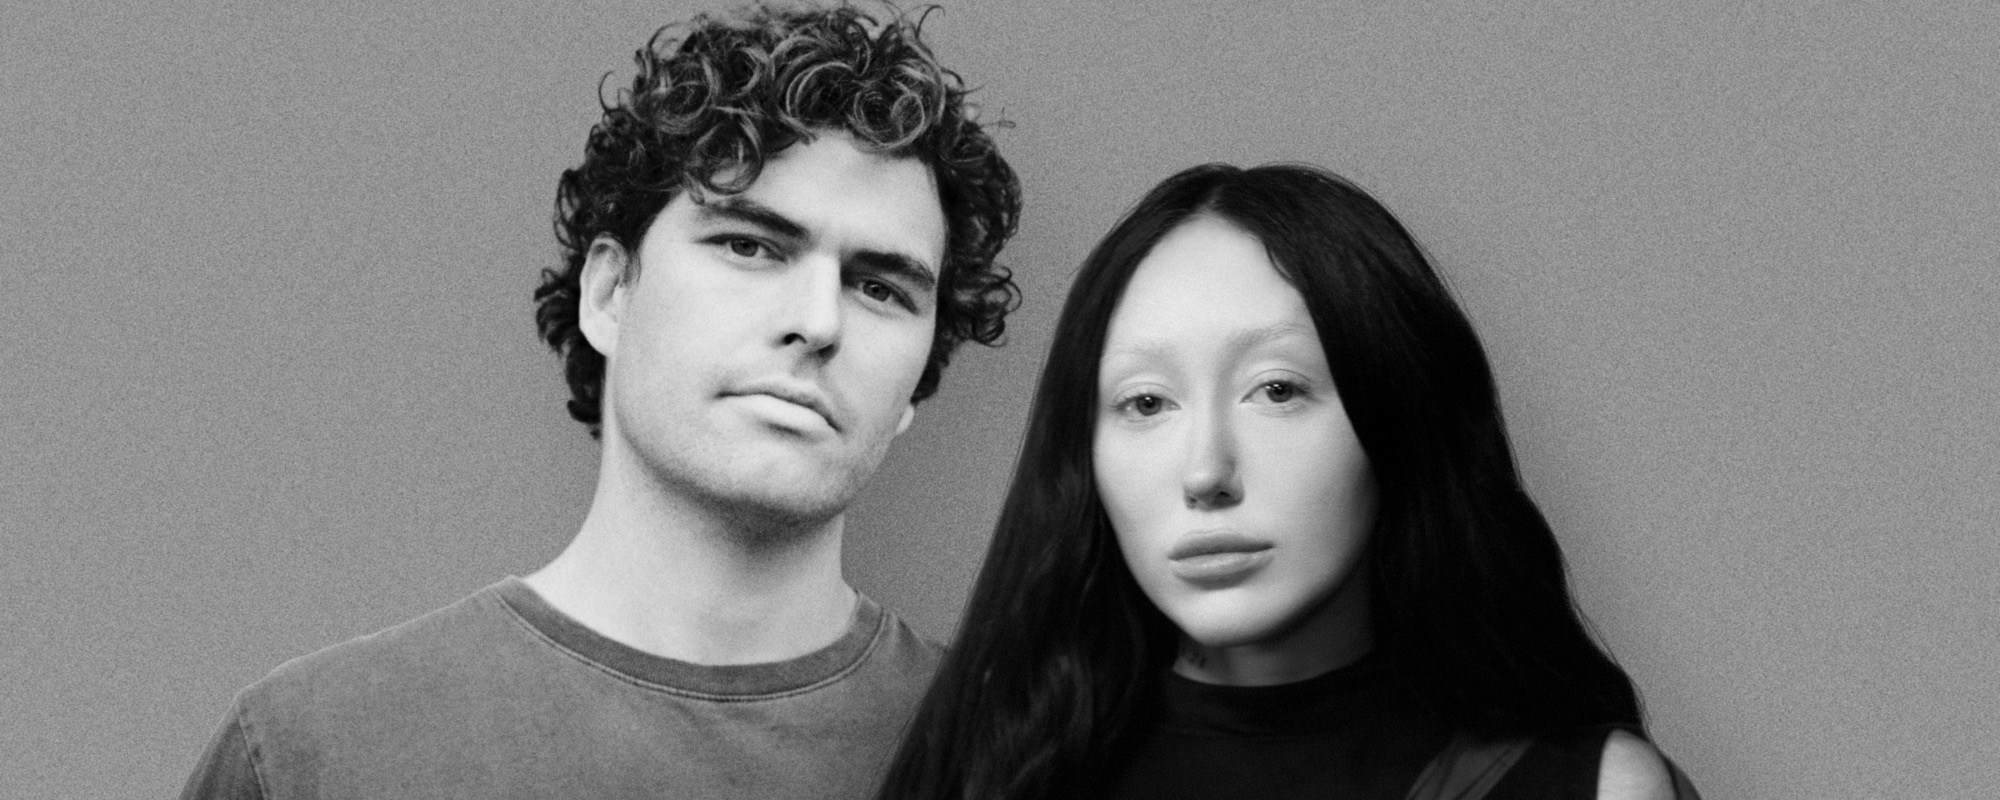 Noah Cyrus Teams Up with Australian Singer Vance Joy for “Everybody Needs Someone”